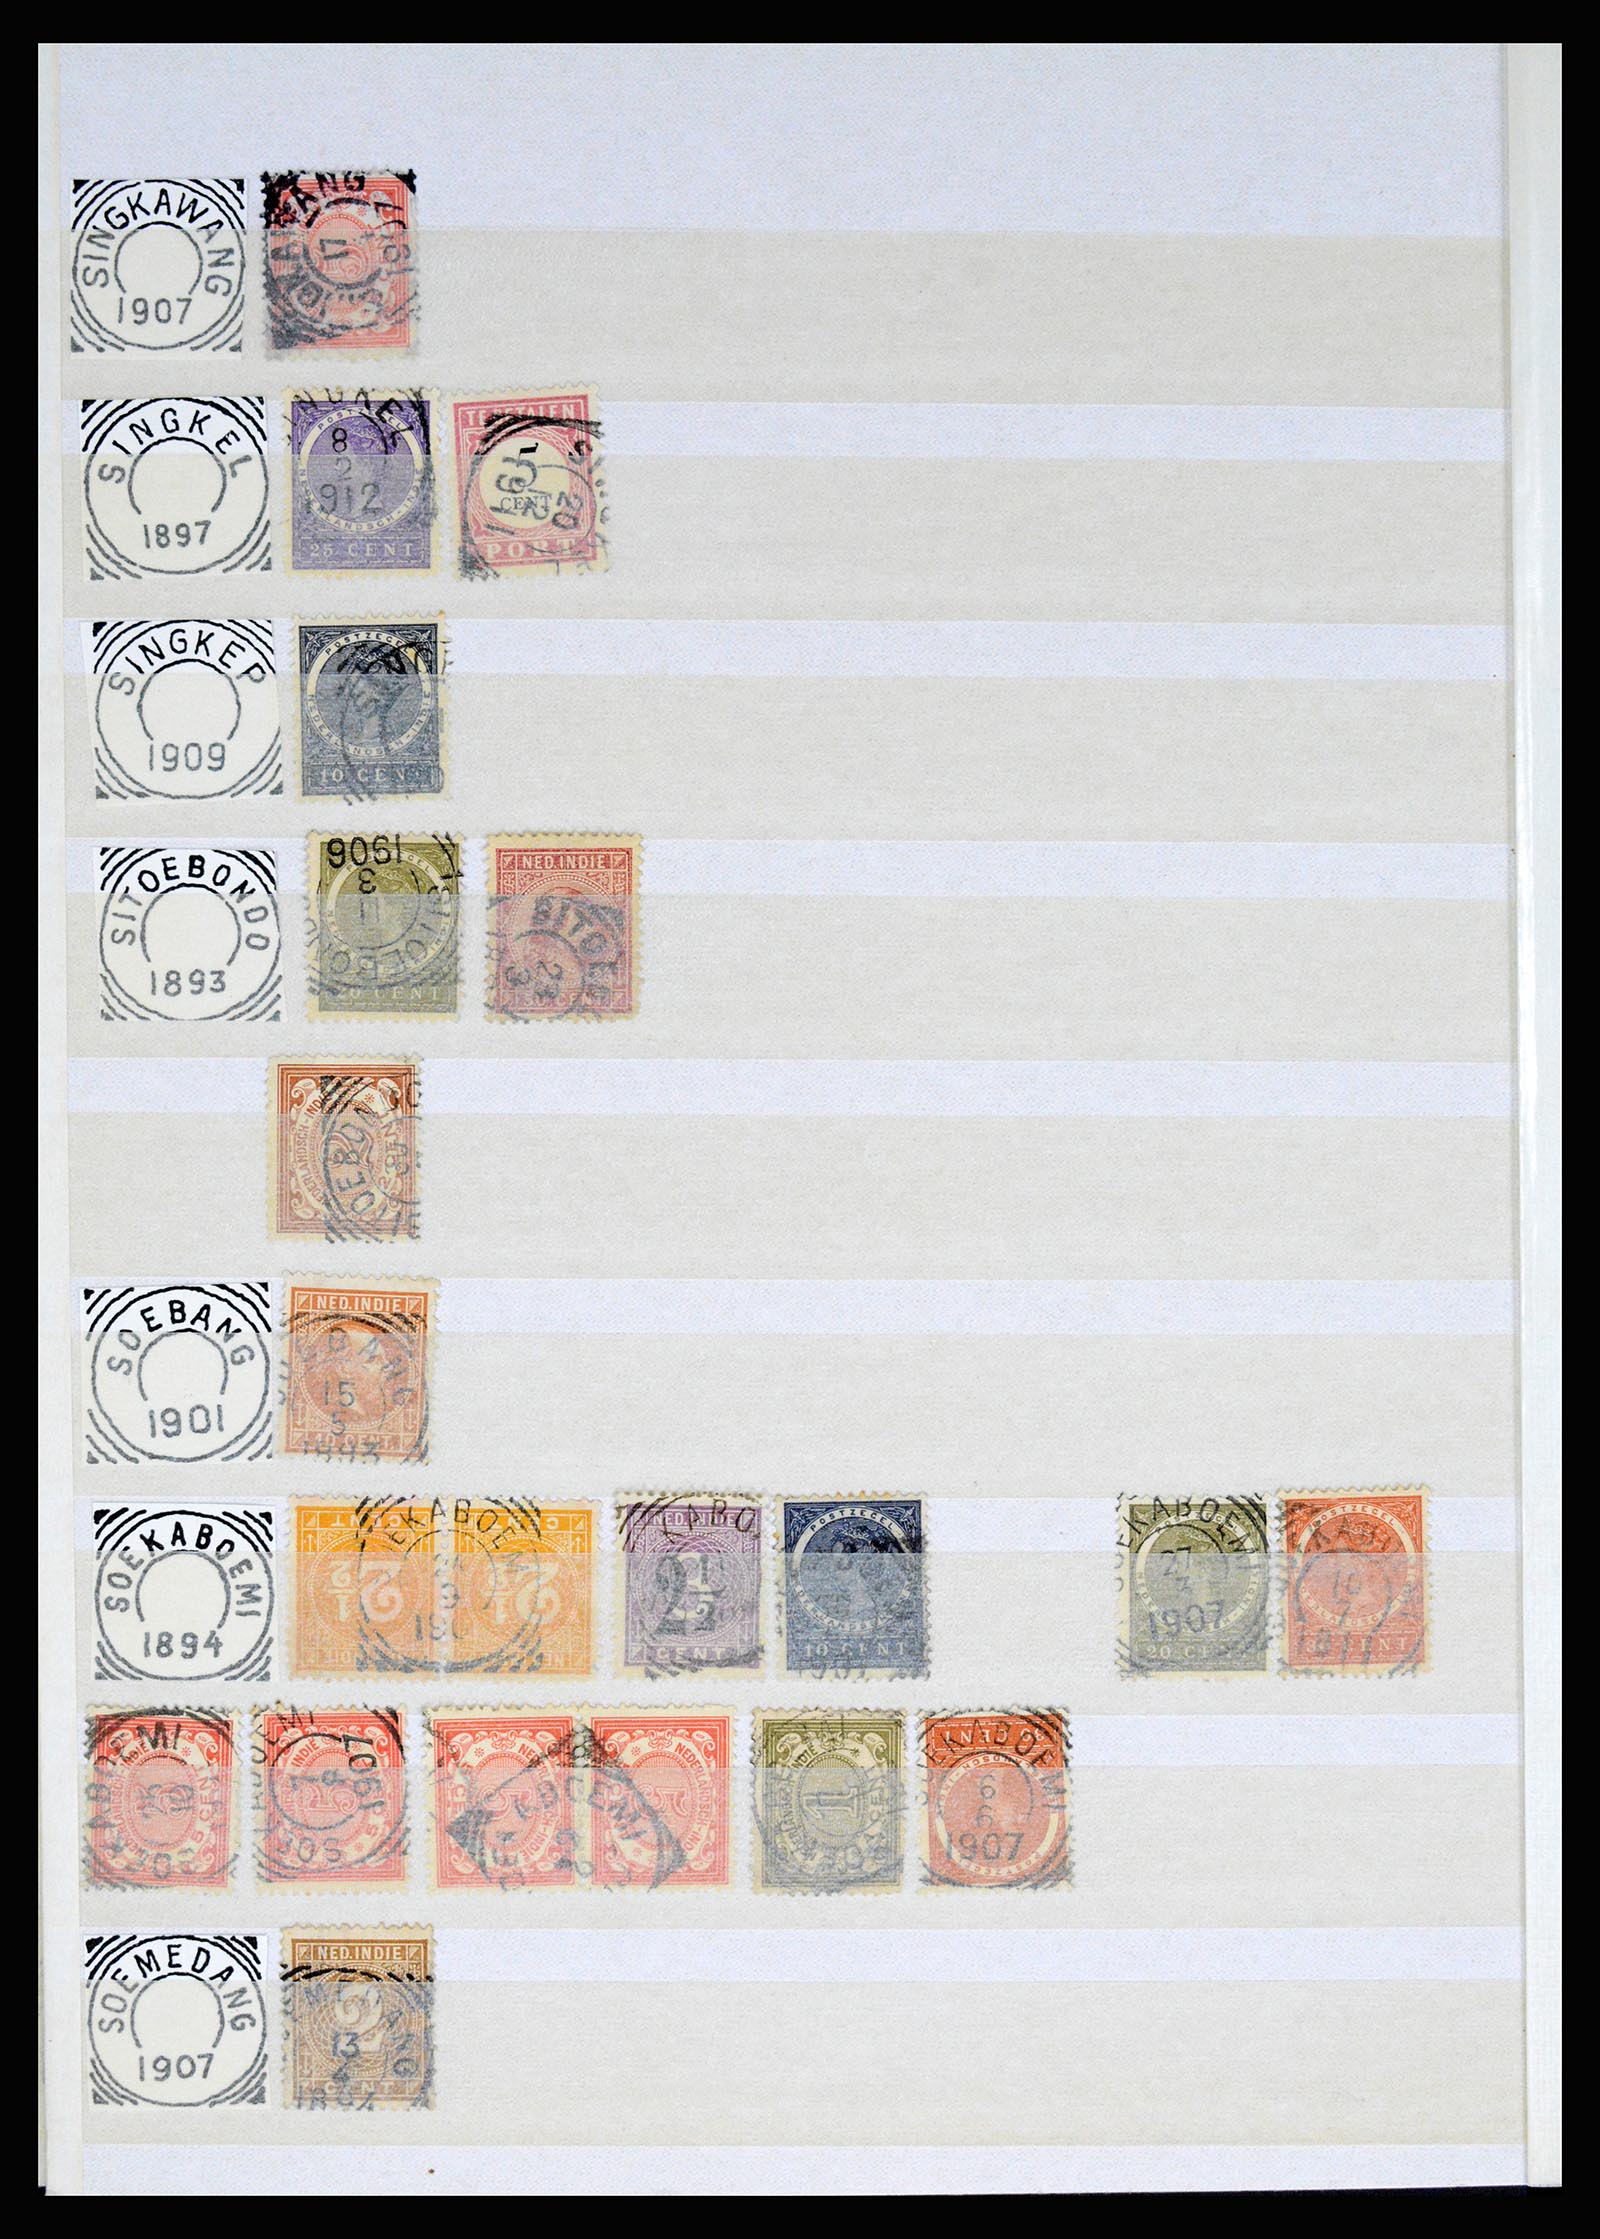 36839 091 - Stamp collection 36839 Dutch east Indies square cancels.